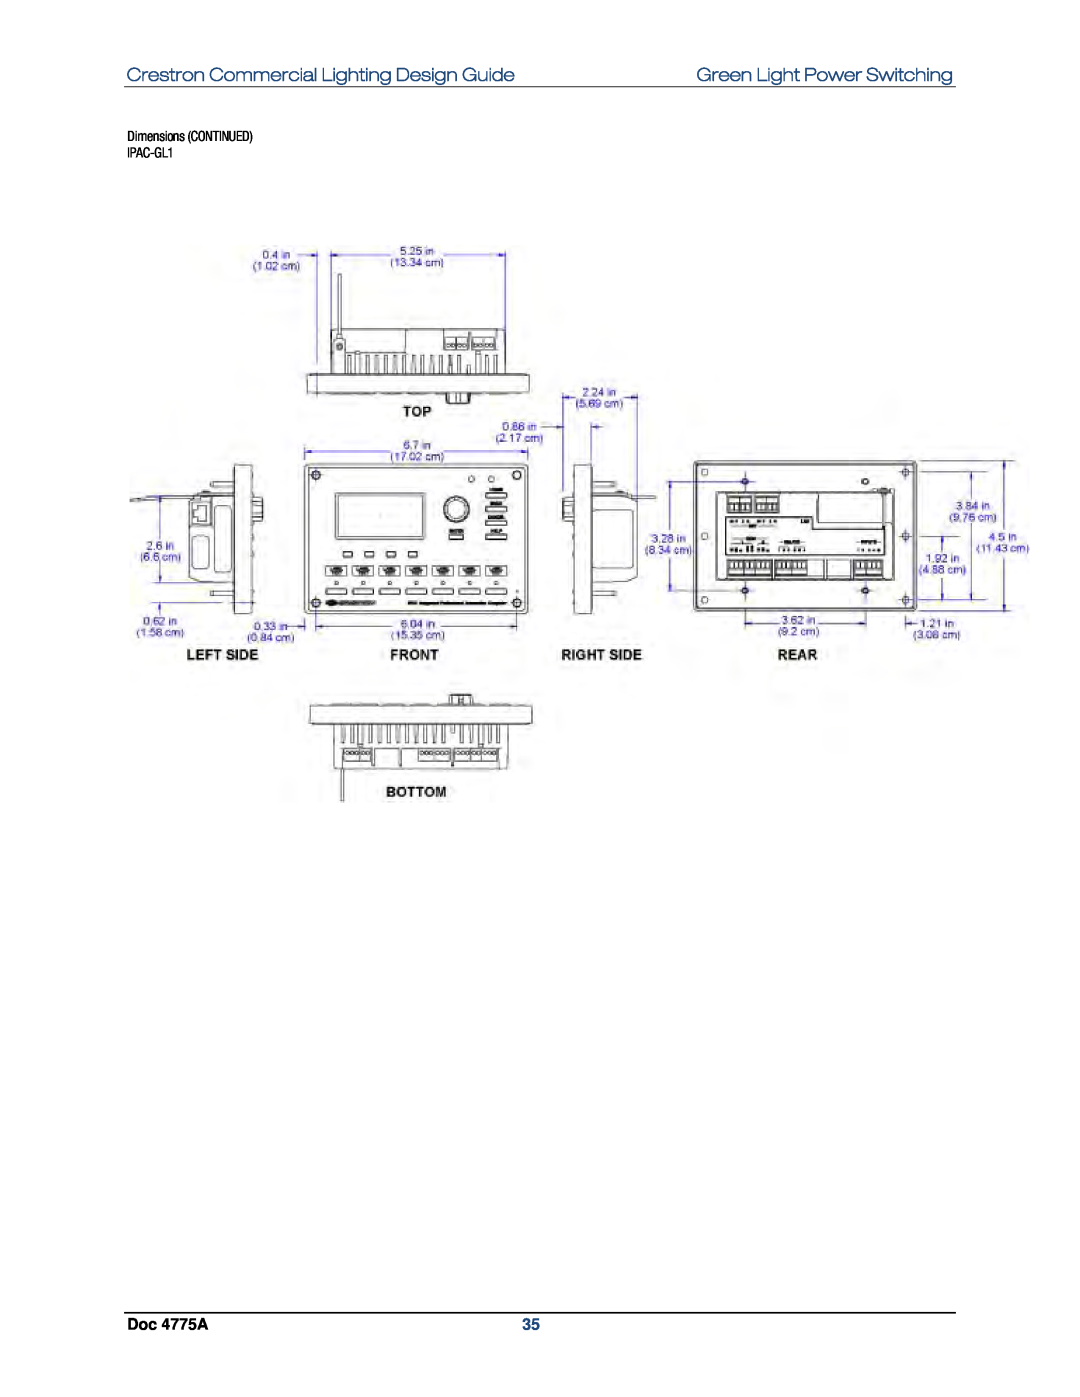 Crestron electronic GLPS-HSW, IPAC-GL1 Crestron Commercial Lighting Design Guide, Green Light Power Switching, Doc 4775A 